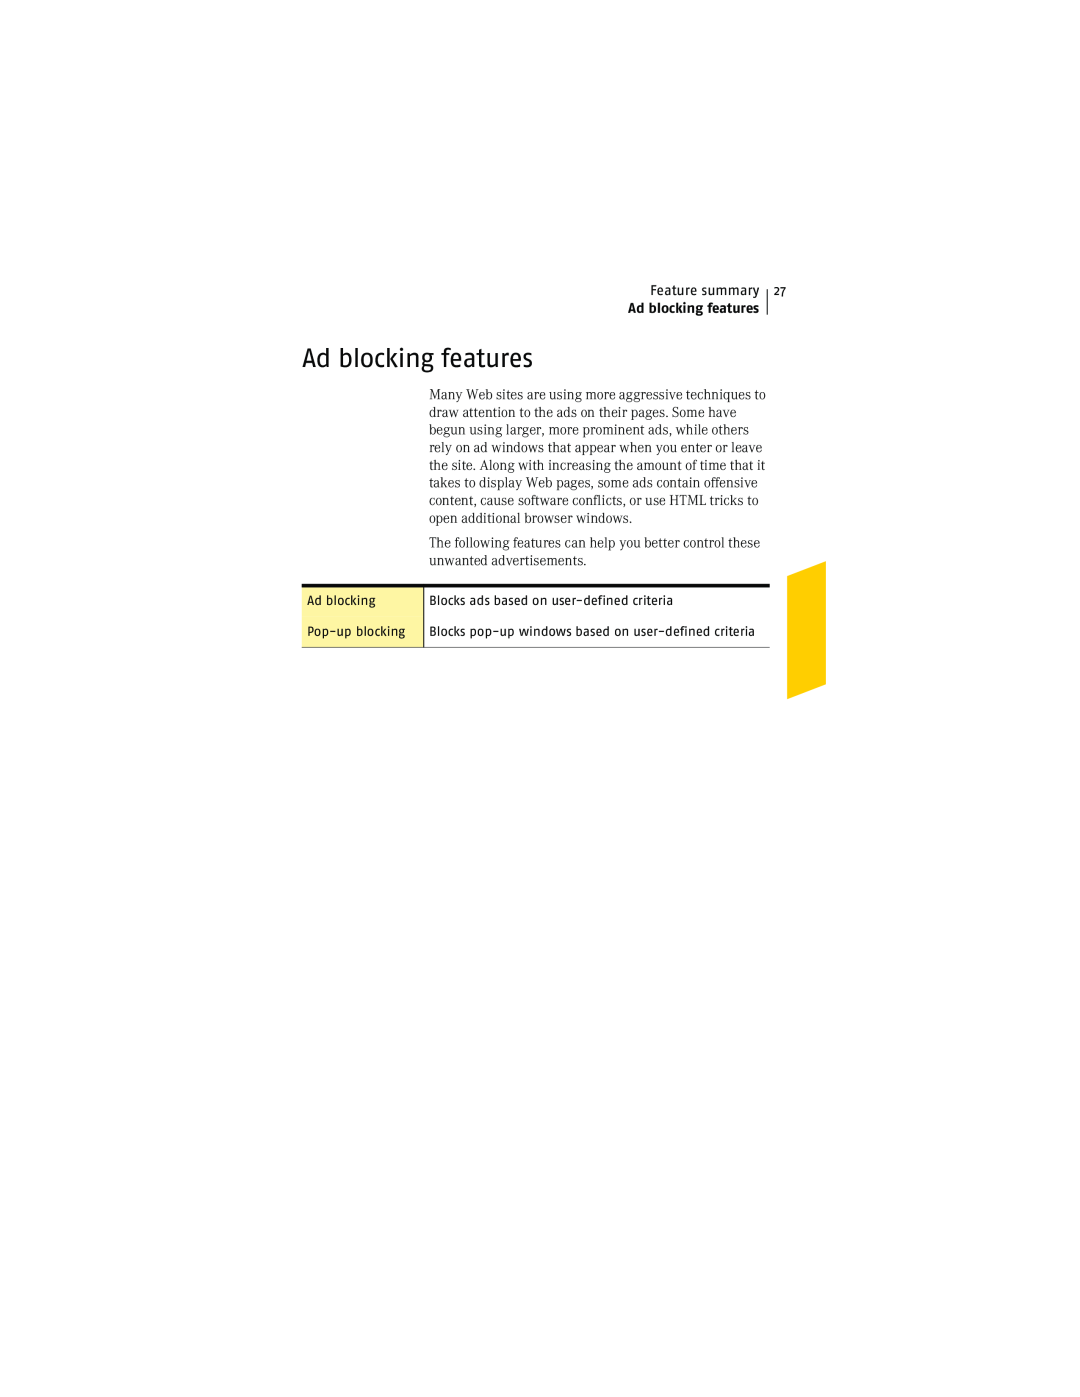 Symantec NIS2005 manual Ad blocking features, Feature summary 